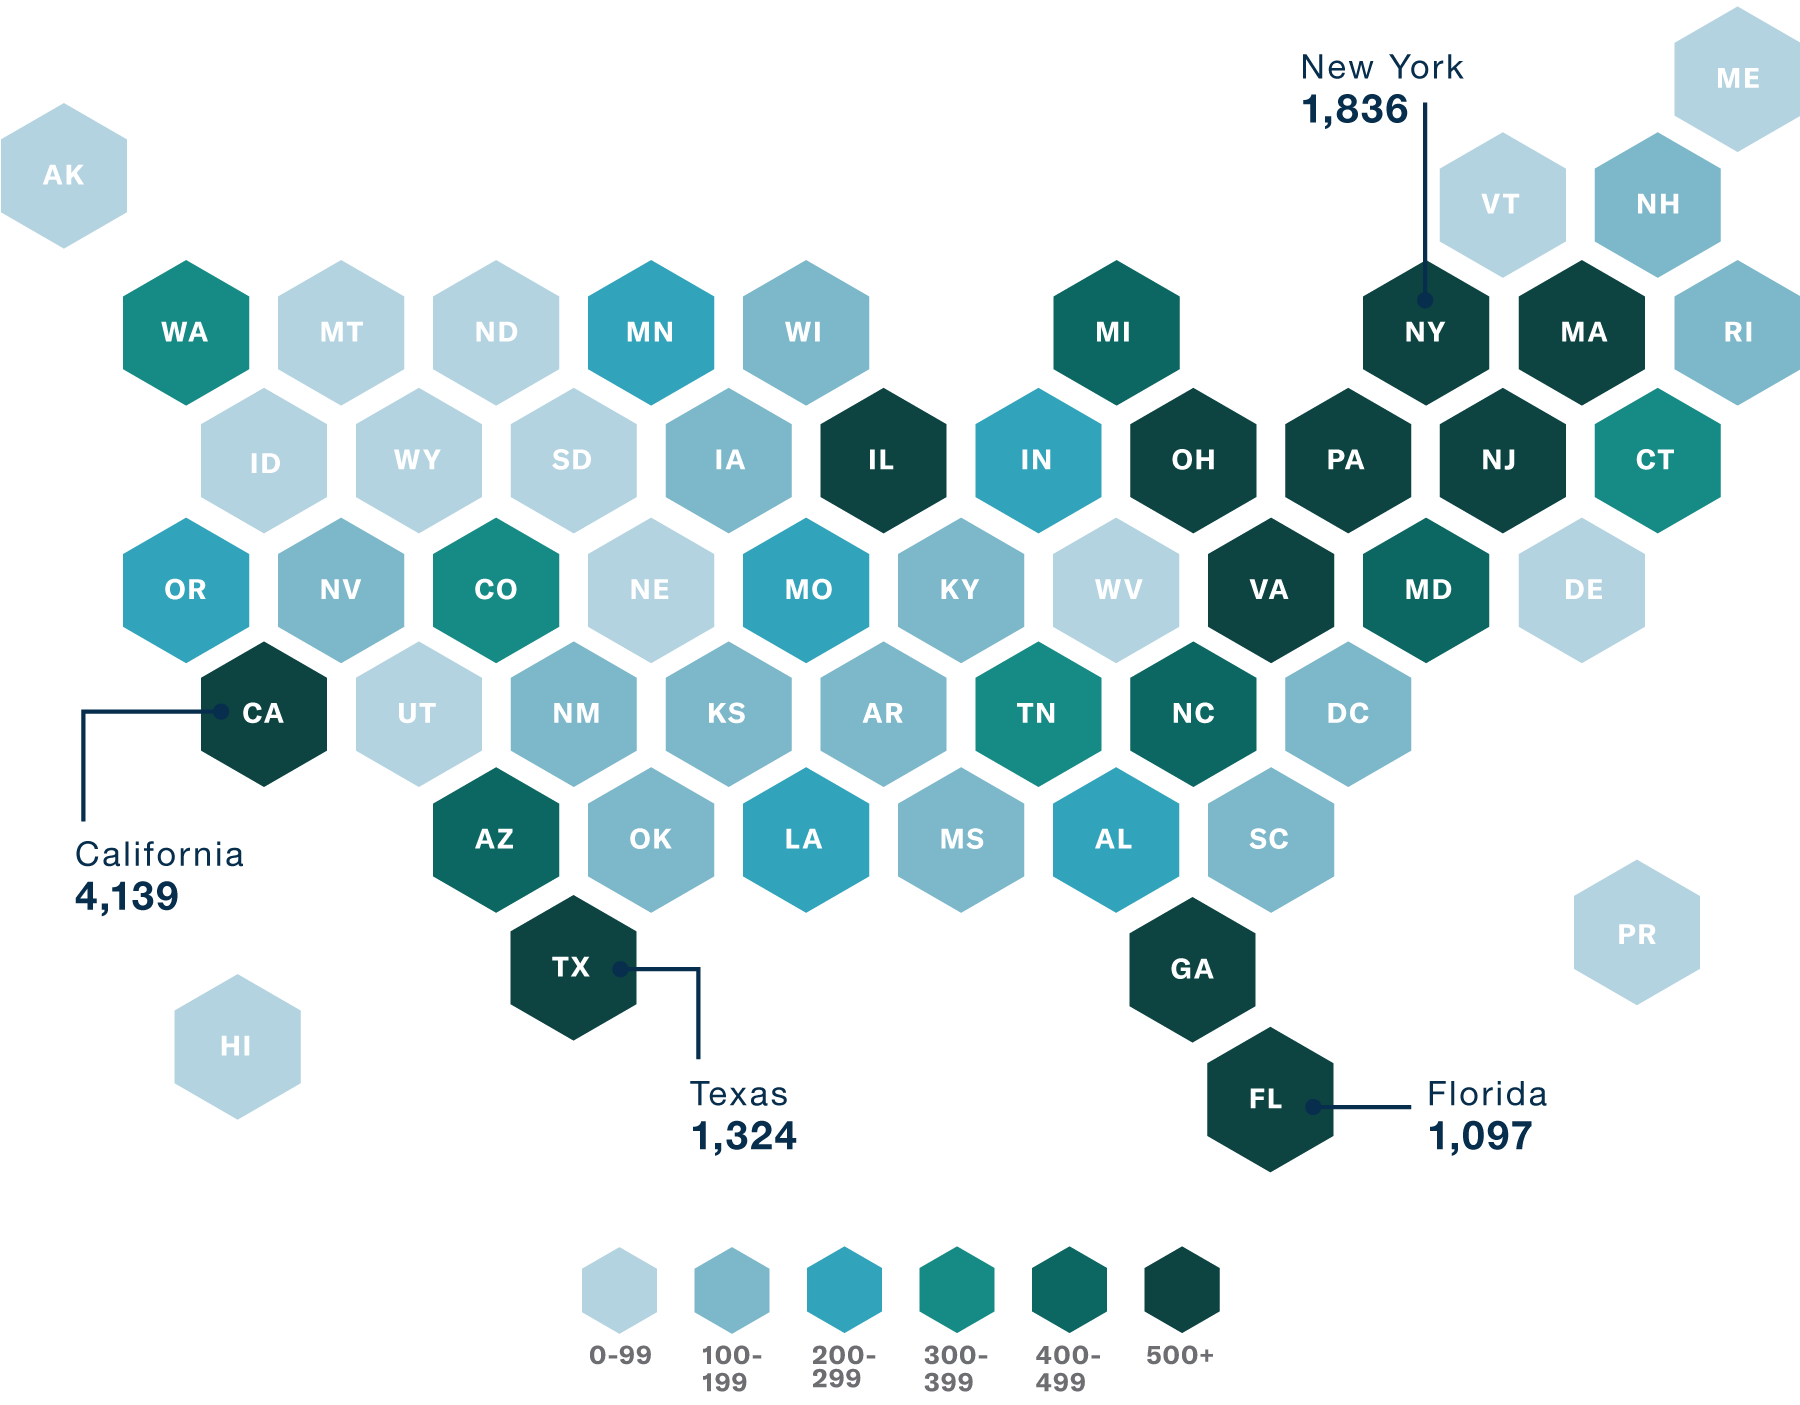 hexagon map of Get Us PPE requests by state through January 2021